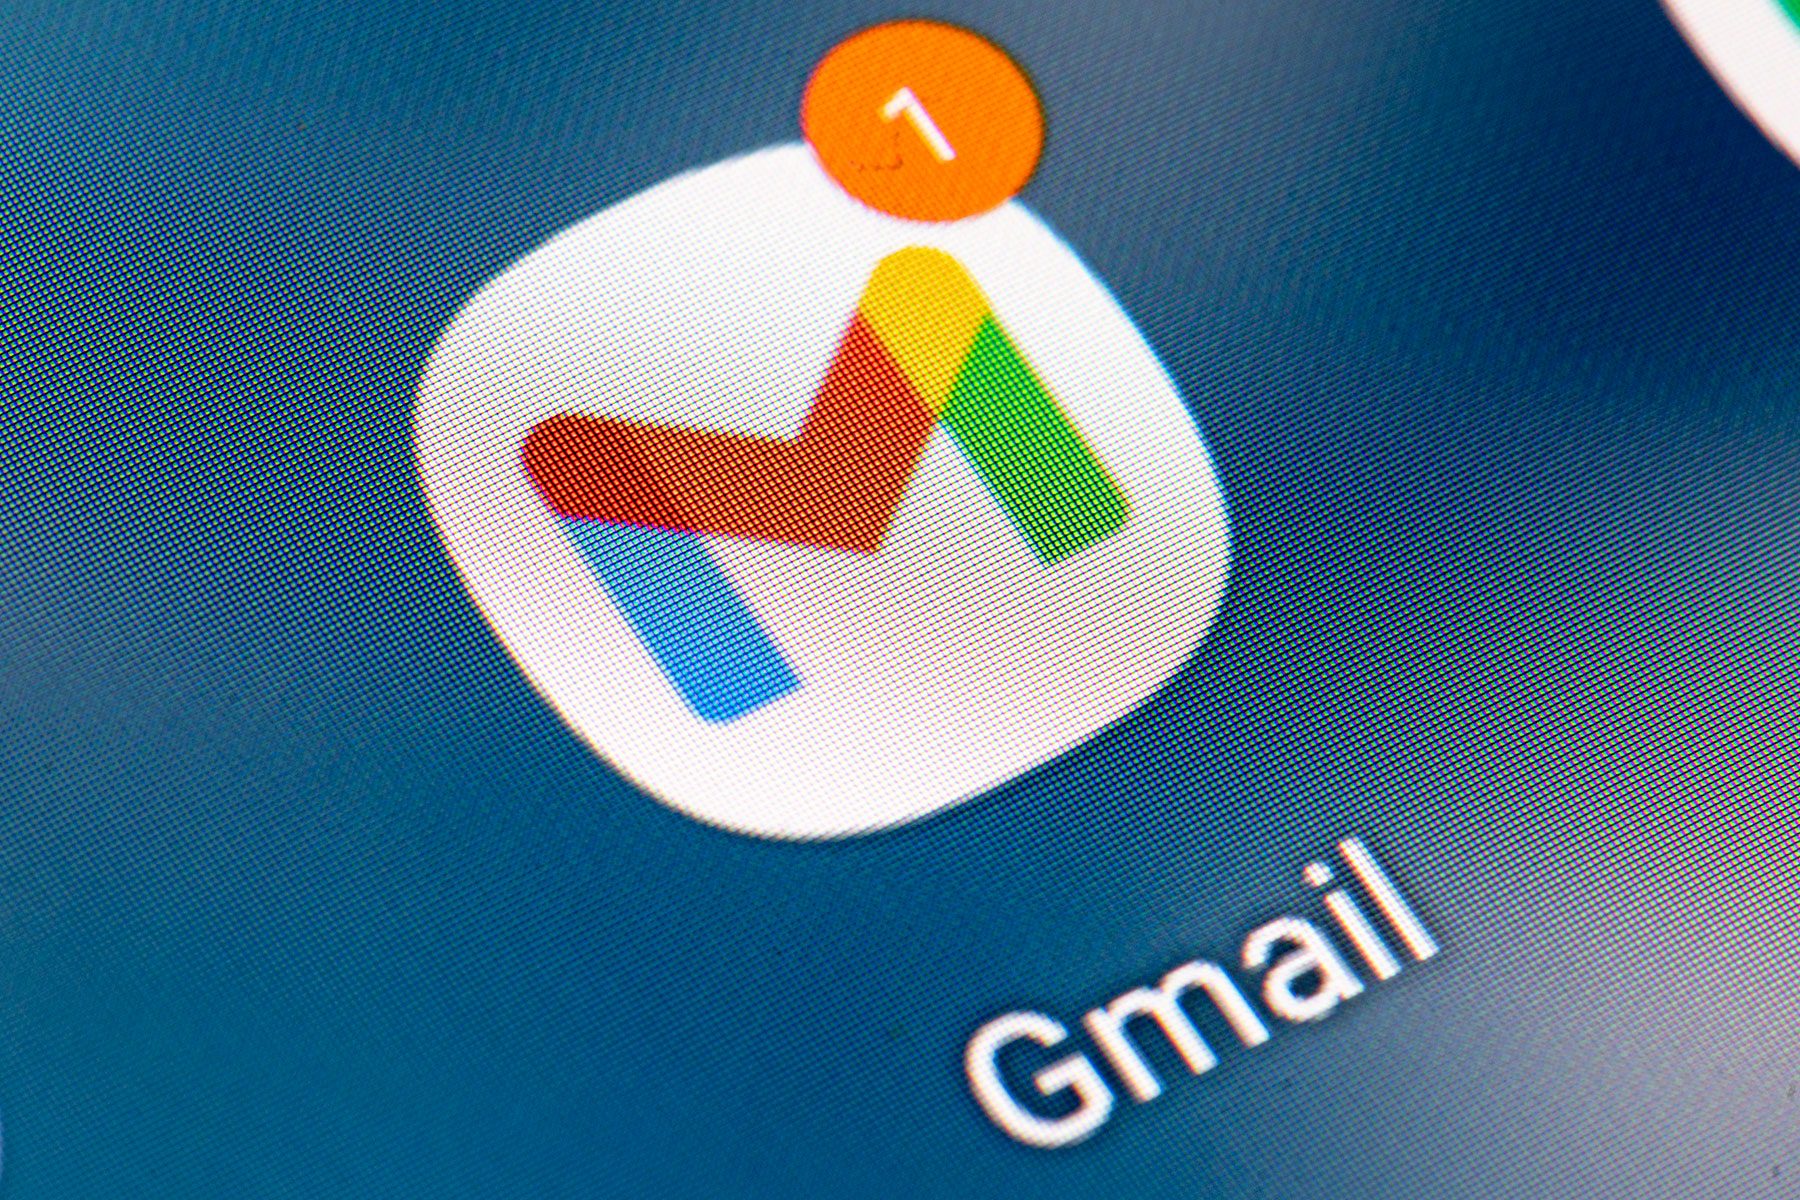 Gmail App on the screen of a smartphone